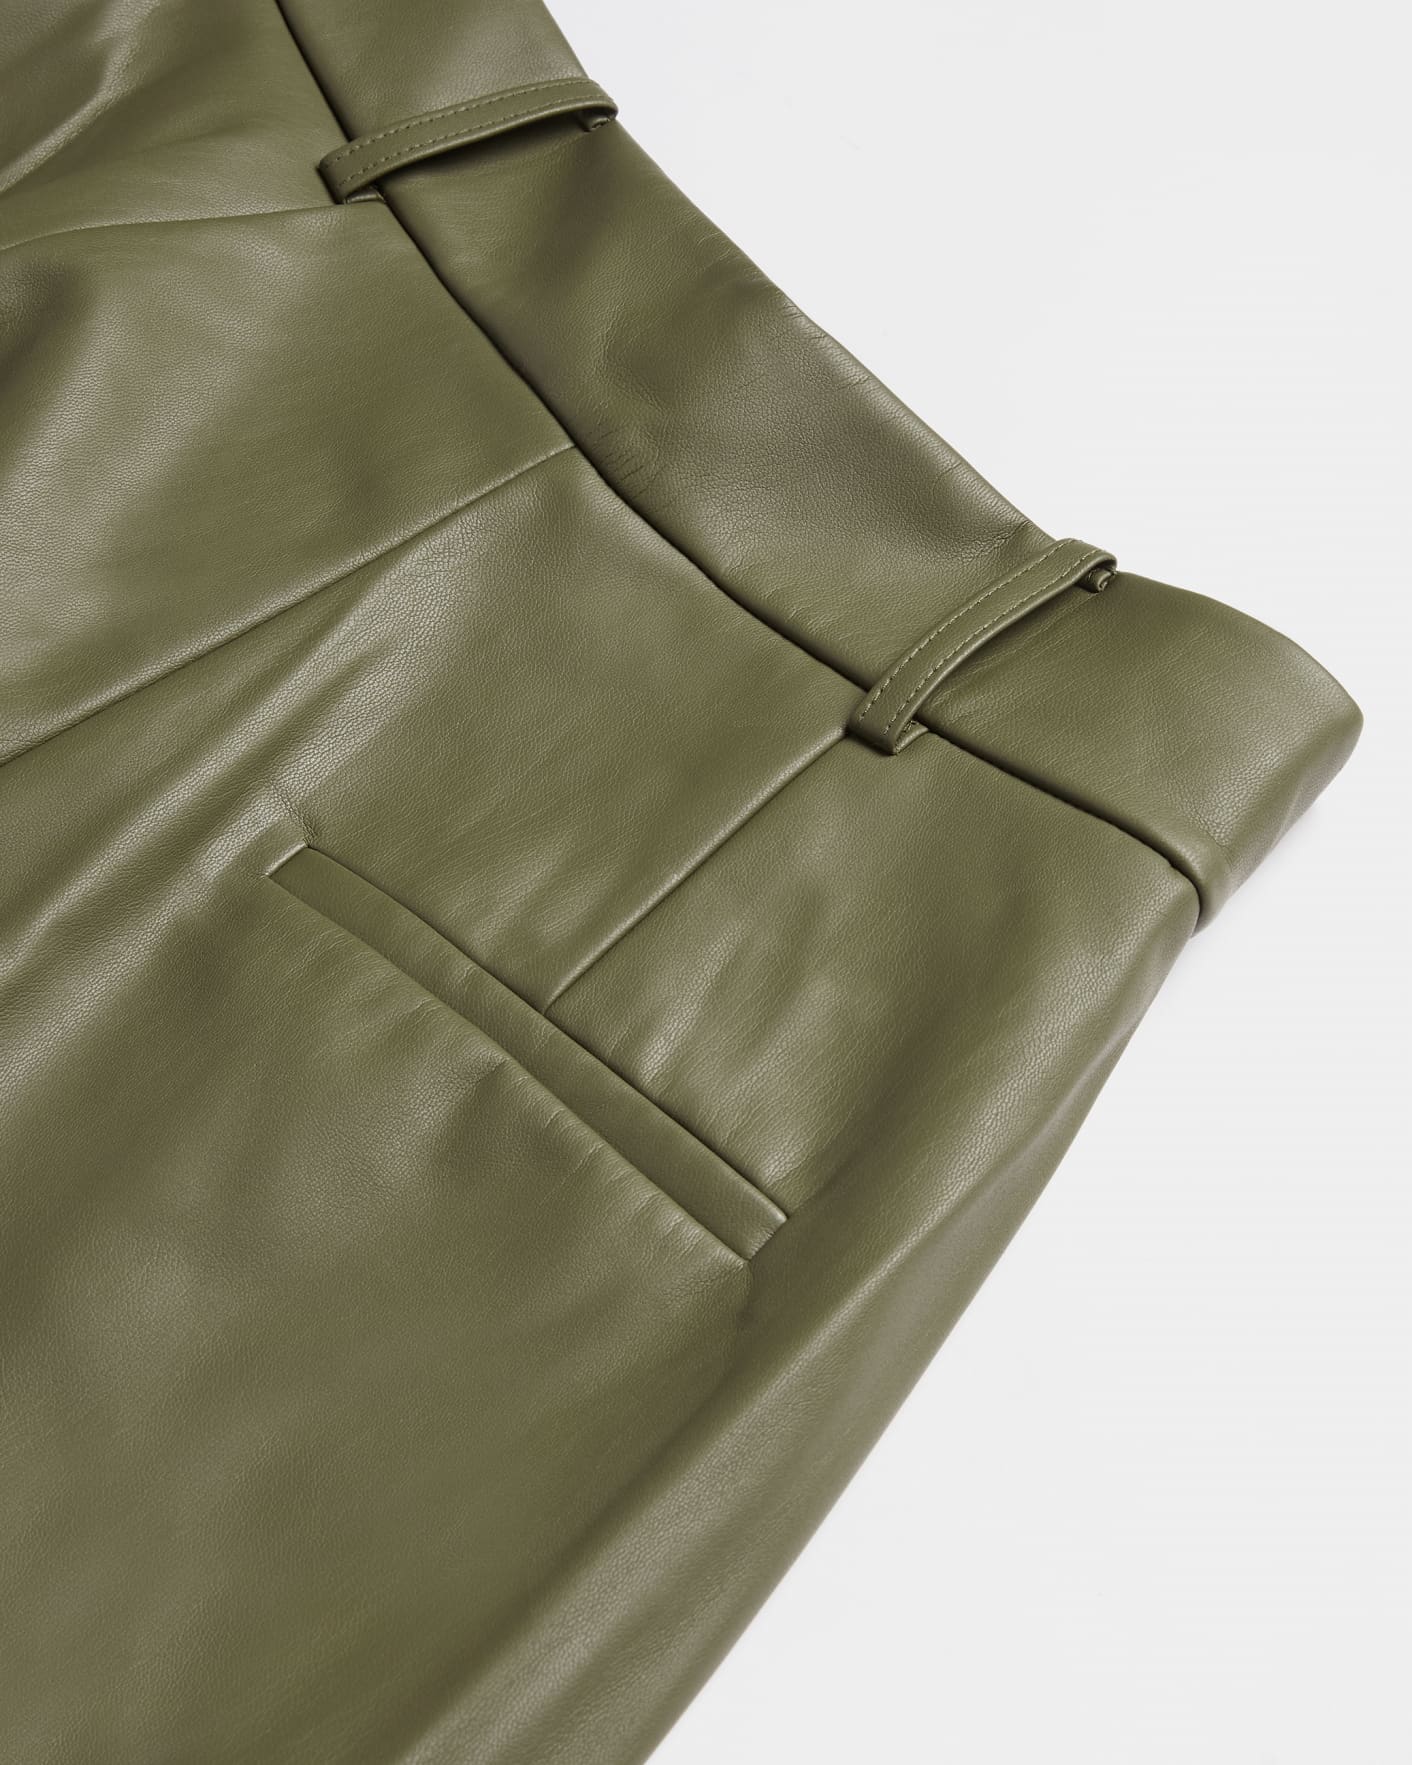 Olive Pleather City Short Ted Baker